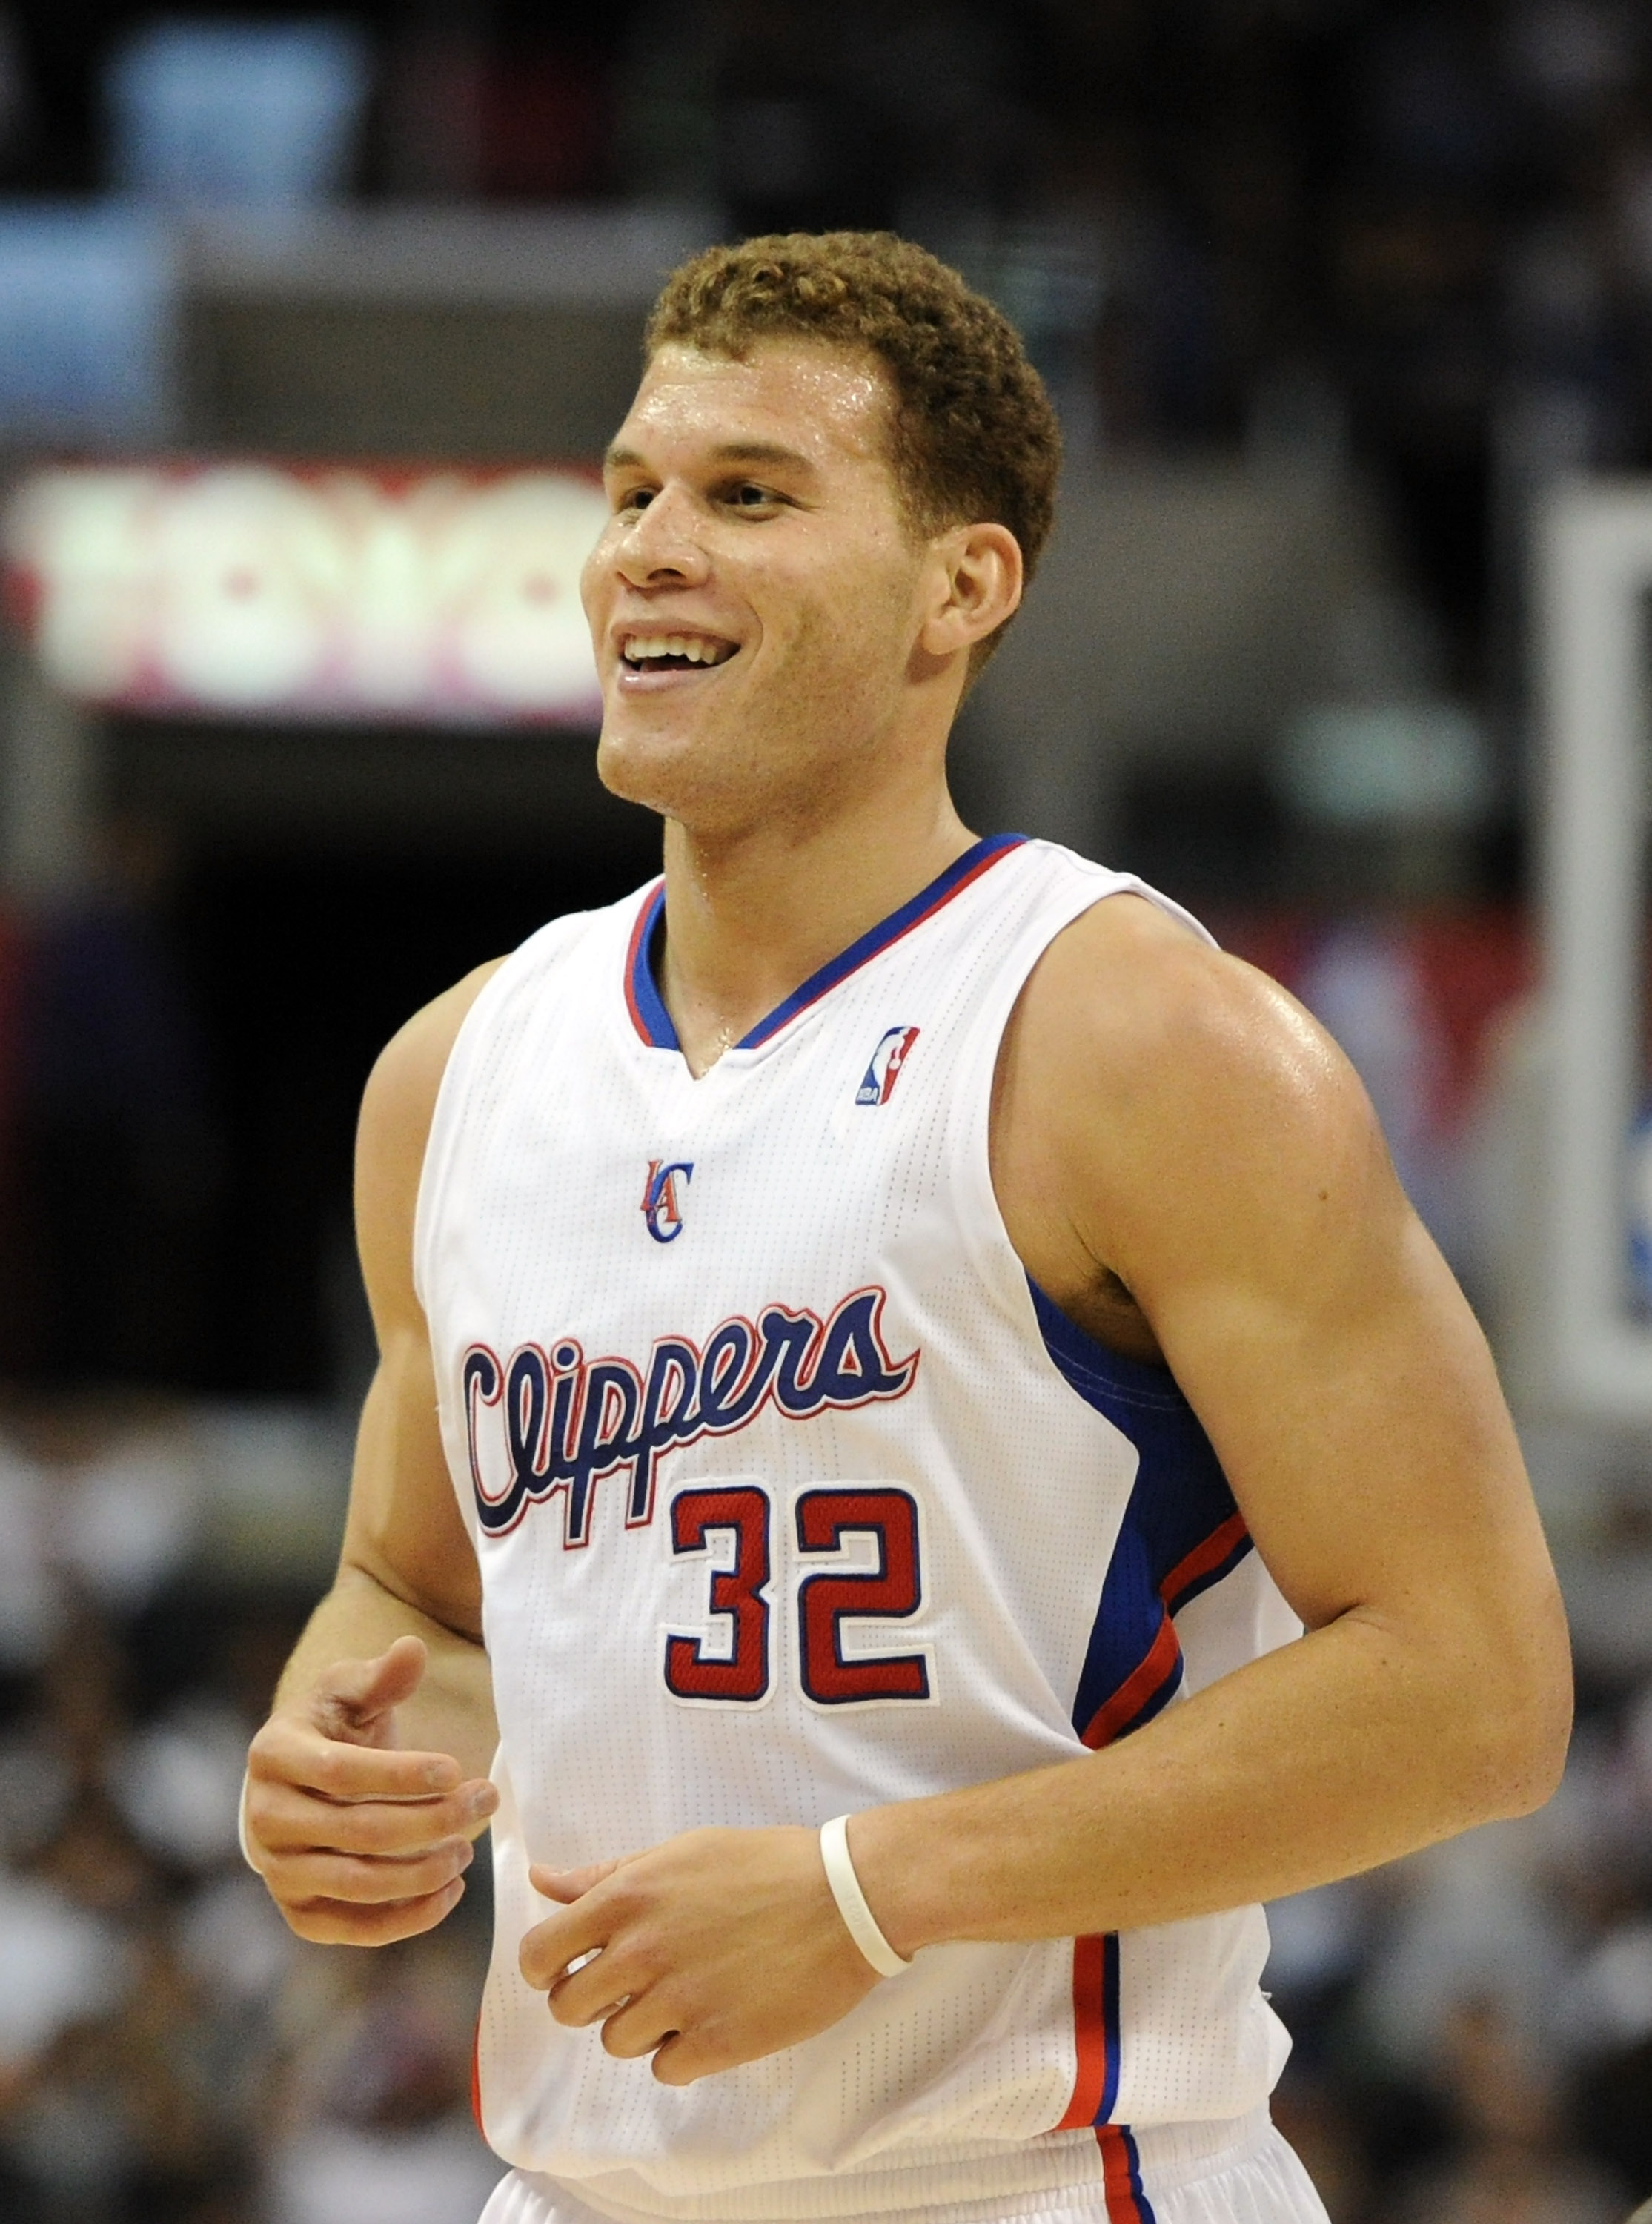 Blake Griffin Los Angeles Clippers #32 Jersey player shirt